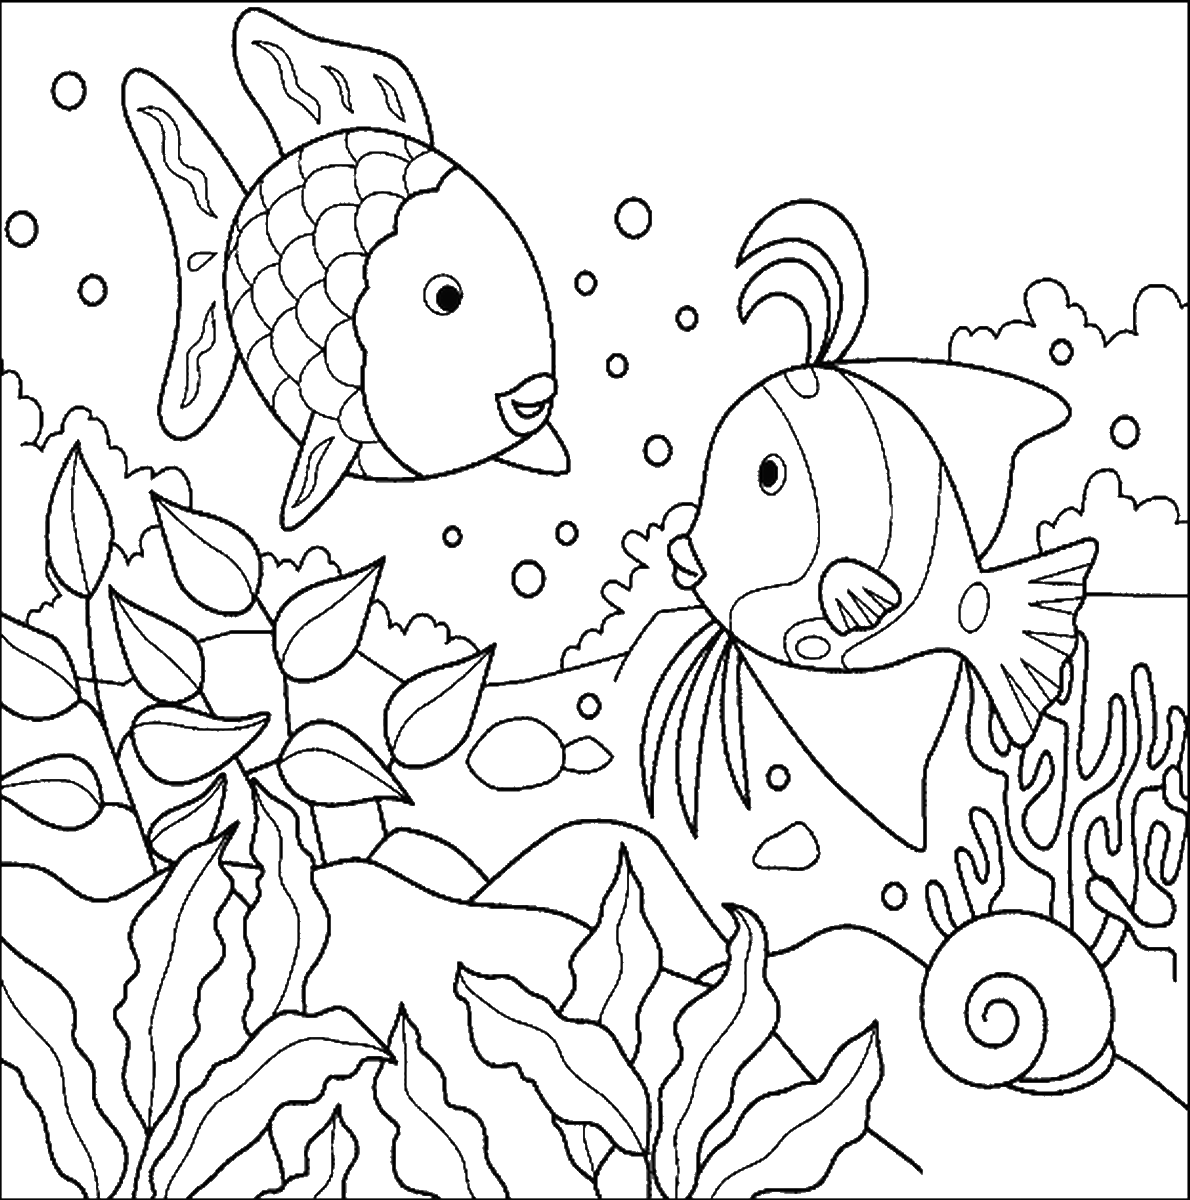 fish picture to color fish coloring pages fish to picture color 